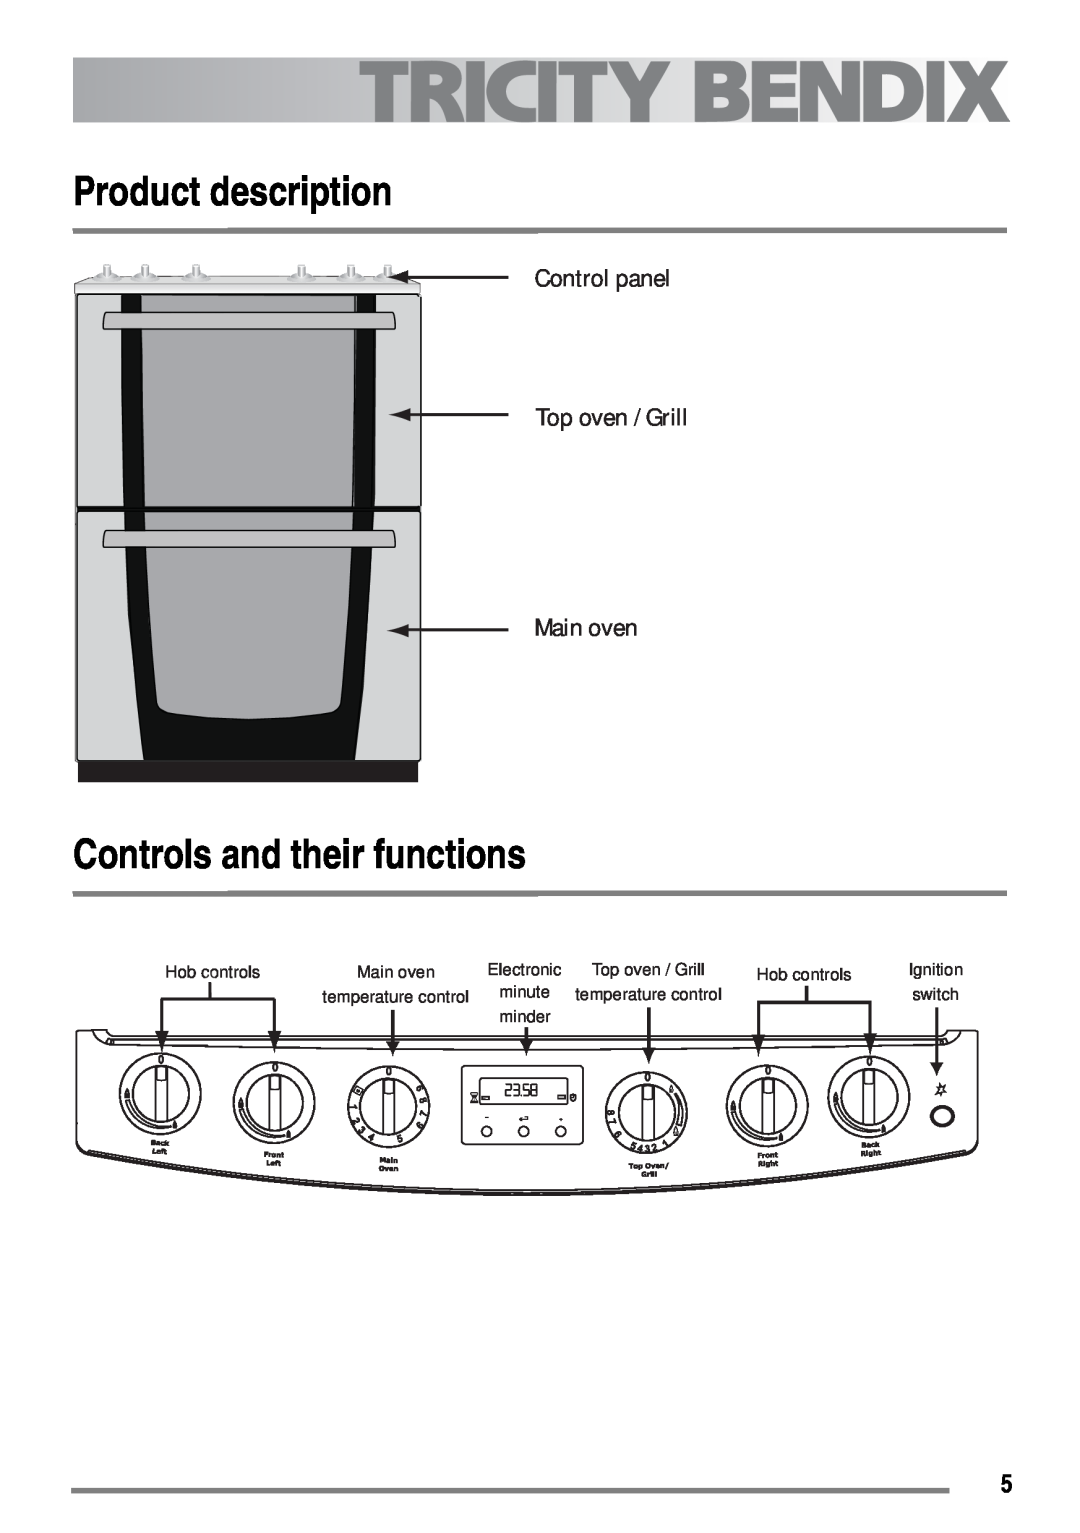 Tricity Bendix SG558/1 Product description, Controls and their functions, Control panel Top oven / Grill Main oven, minute 